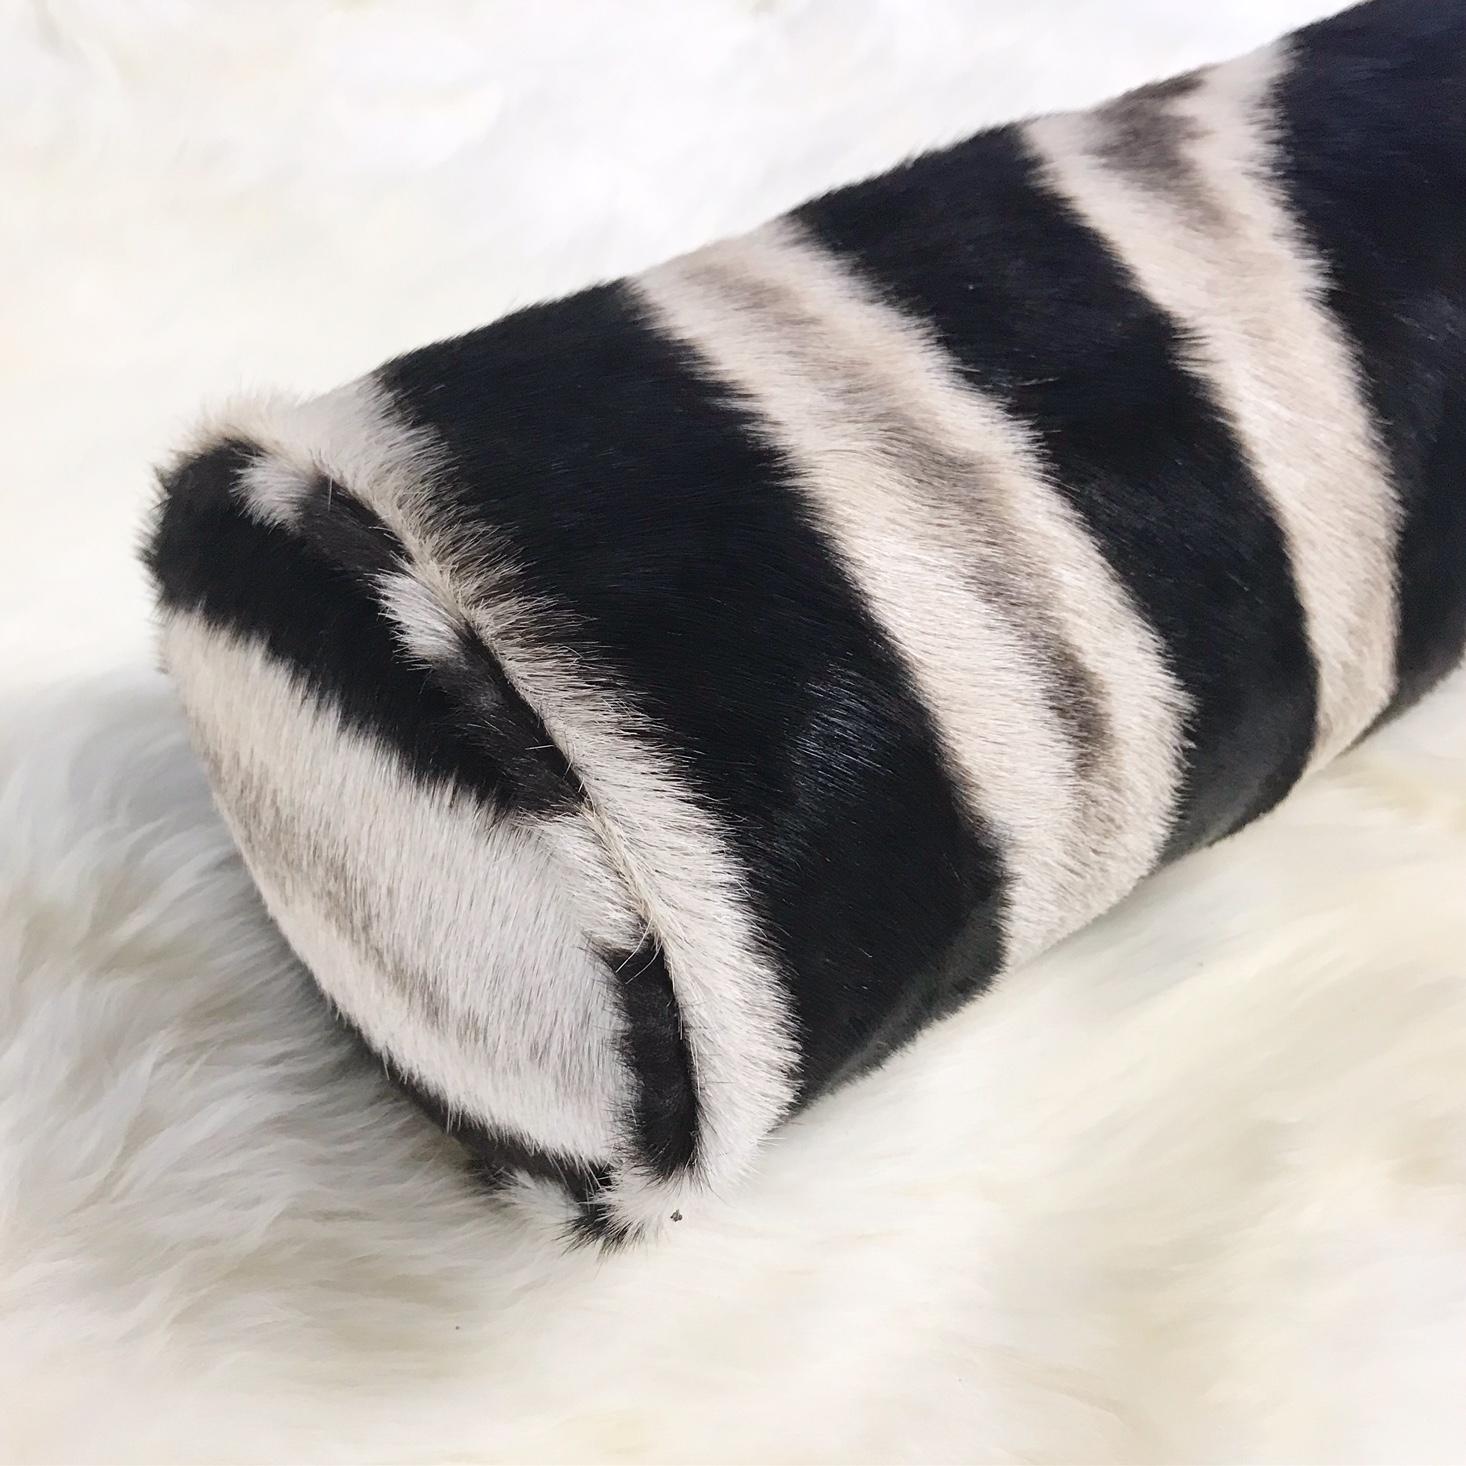 Forsyth zebra hide pillows are simply the best. The most beautiful hides are selected, hand cut, hand-stitched, and hand stuffed with the finest goose down. Each step is meticulously curated by Saint Louis based Forsyth artisans. Every pillow is a